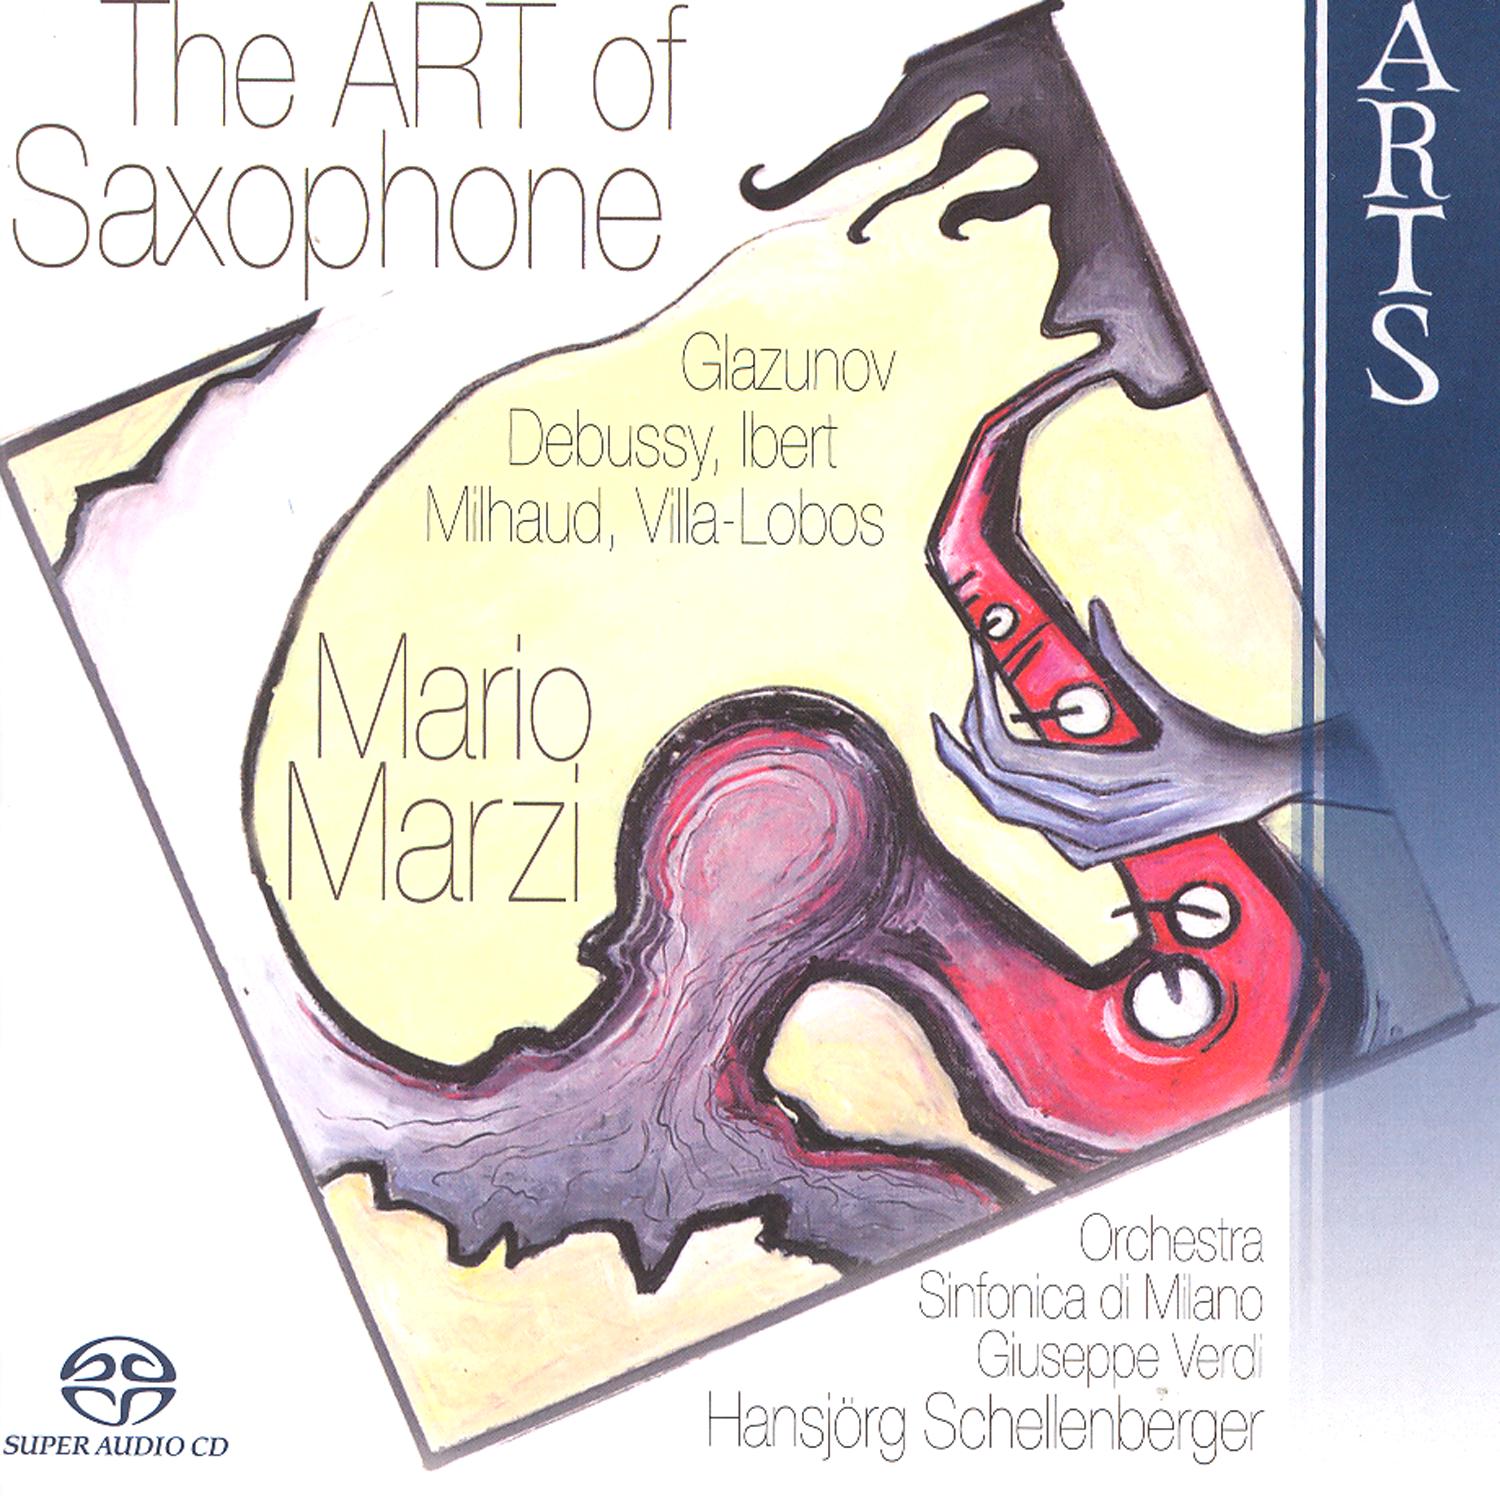 Scaramouche. Suite for saxophone and orchestra: Vif